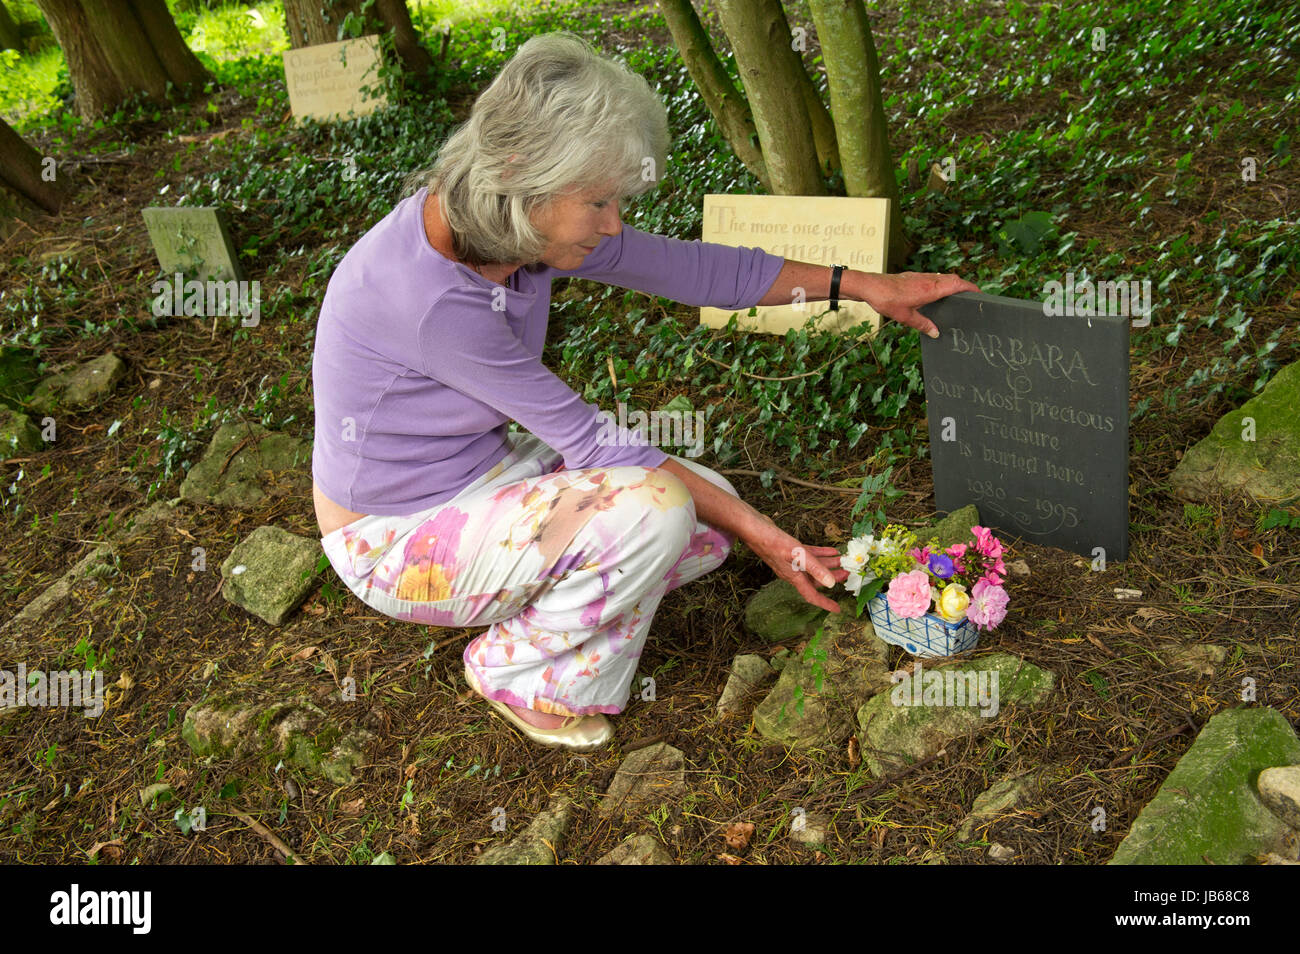 Jilly Cooper at her home in Gloucestershire with greyhounds 'bluebell' (red collar) and 'Feather', showing her pets cemetary and a wall of photographs Stock Photo